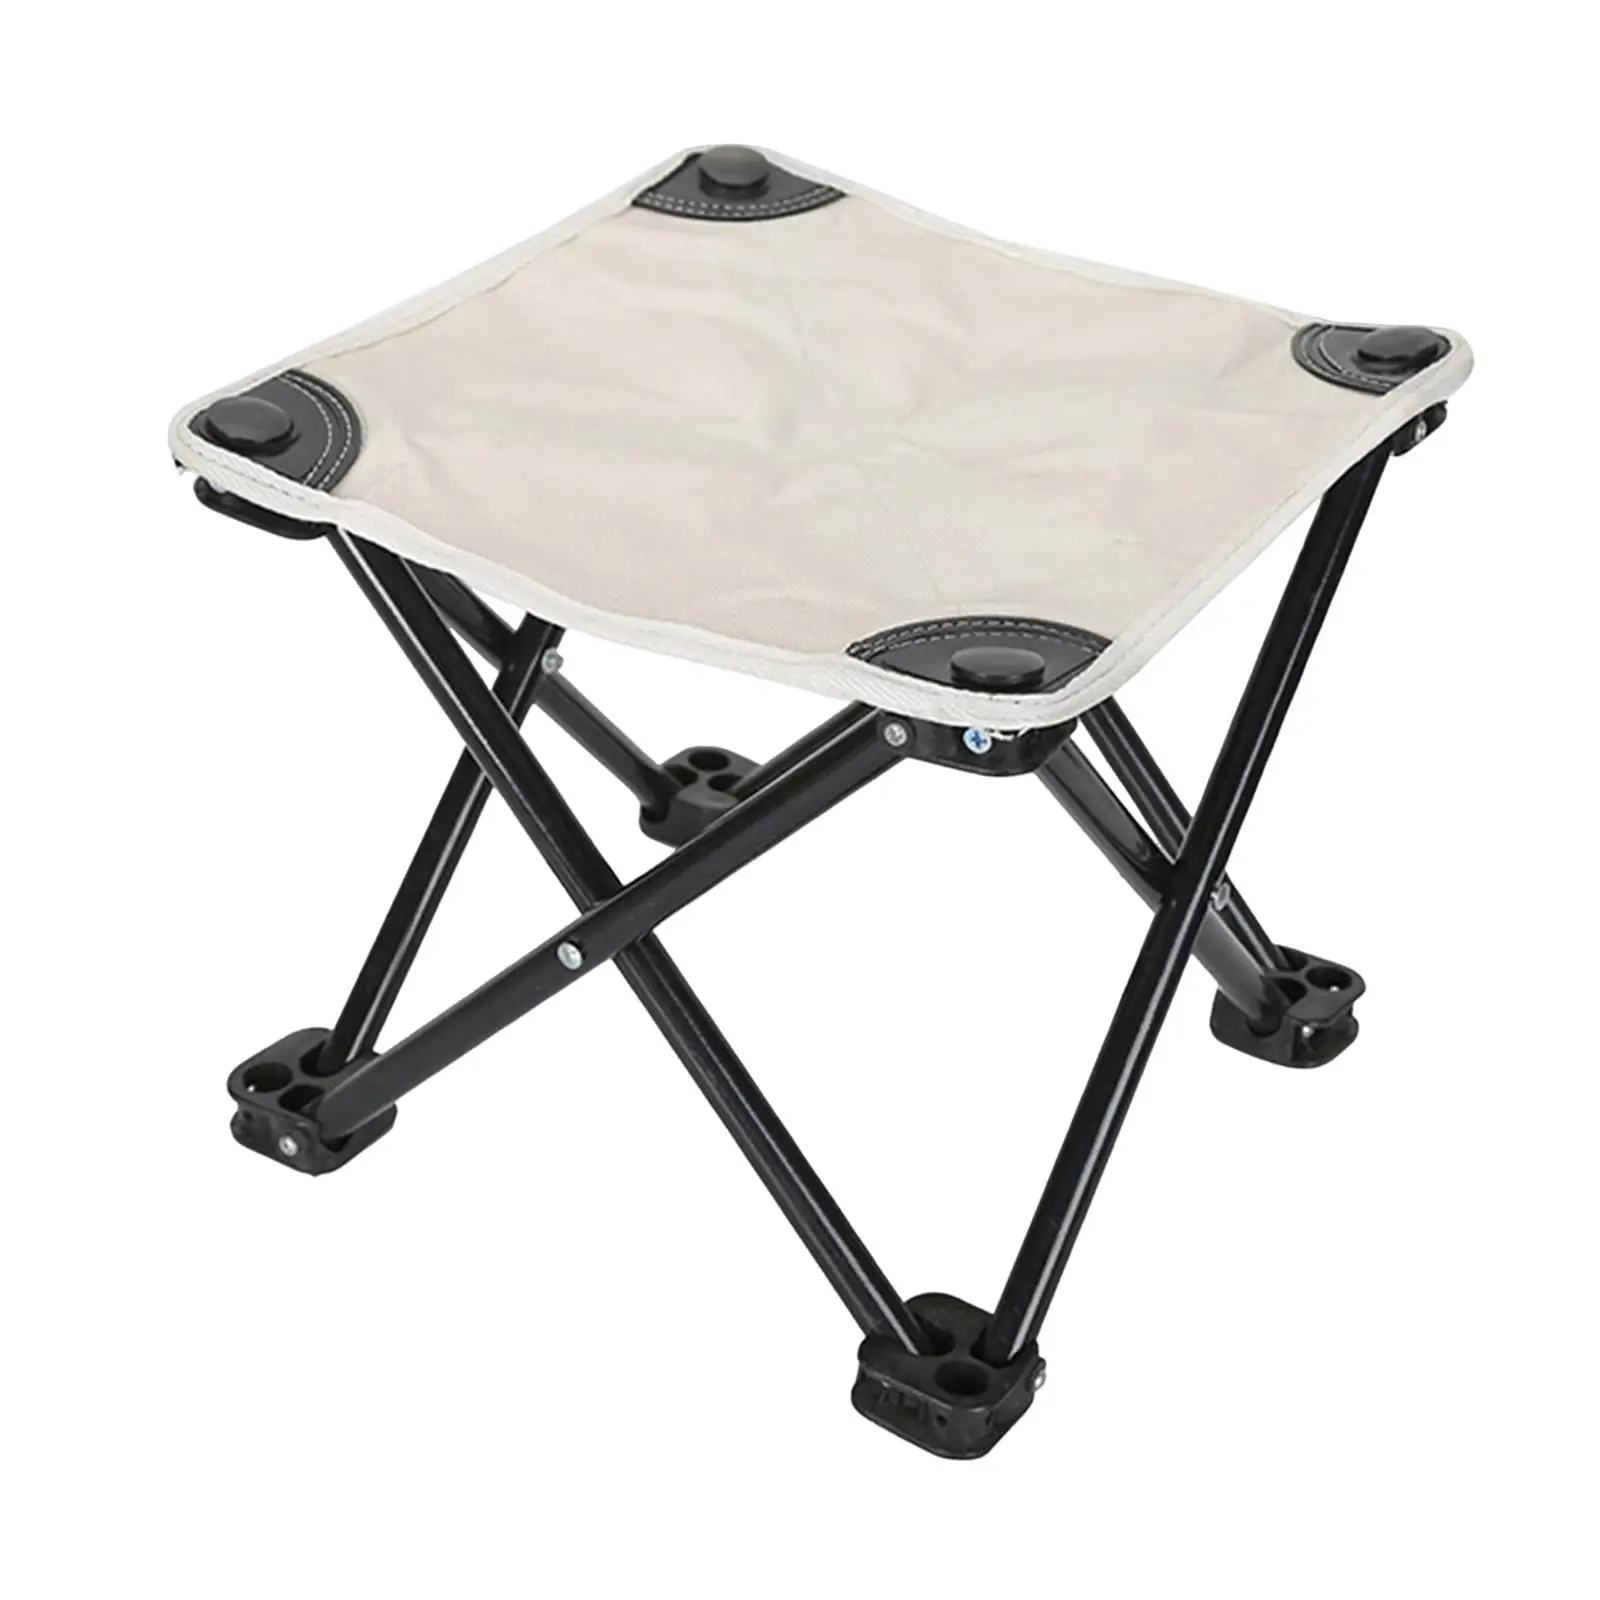 Camp Stool Lightweight Footstool Seat Small Chair Easy to Carry Heavy Duty Folding Stool for BBQ Fishing Hiking Picnic Outside